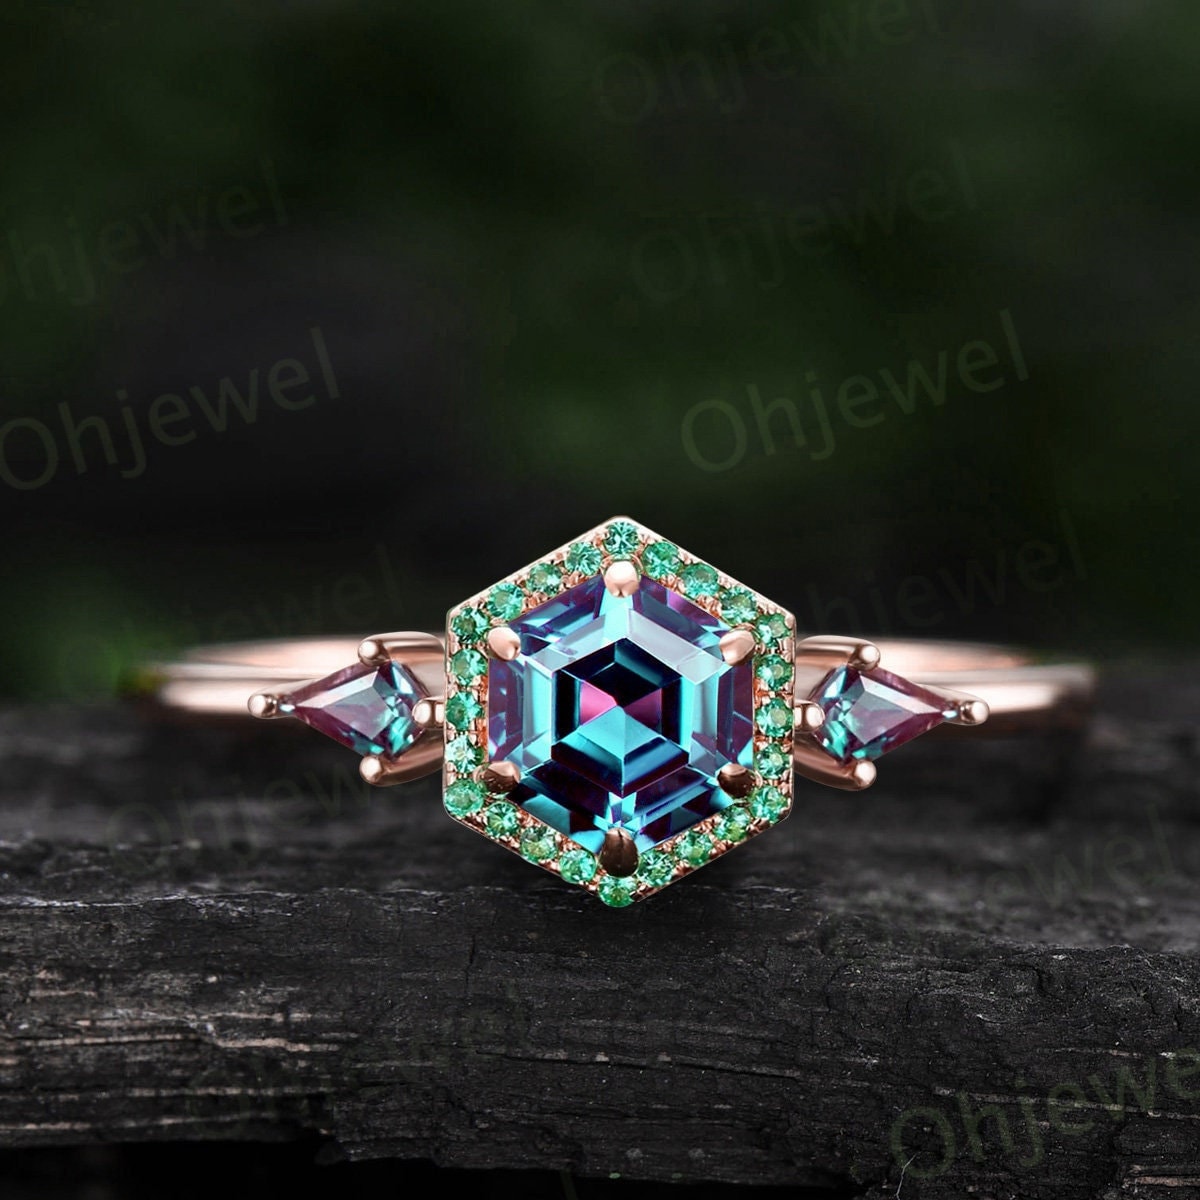 Hexagon cut Alexandrite ring rose gold halo emerald ring vintage kite cut alexandrite ring women unique engagement ring gemstone ring Gift